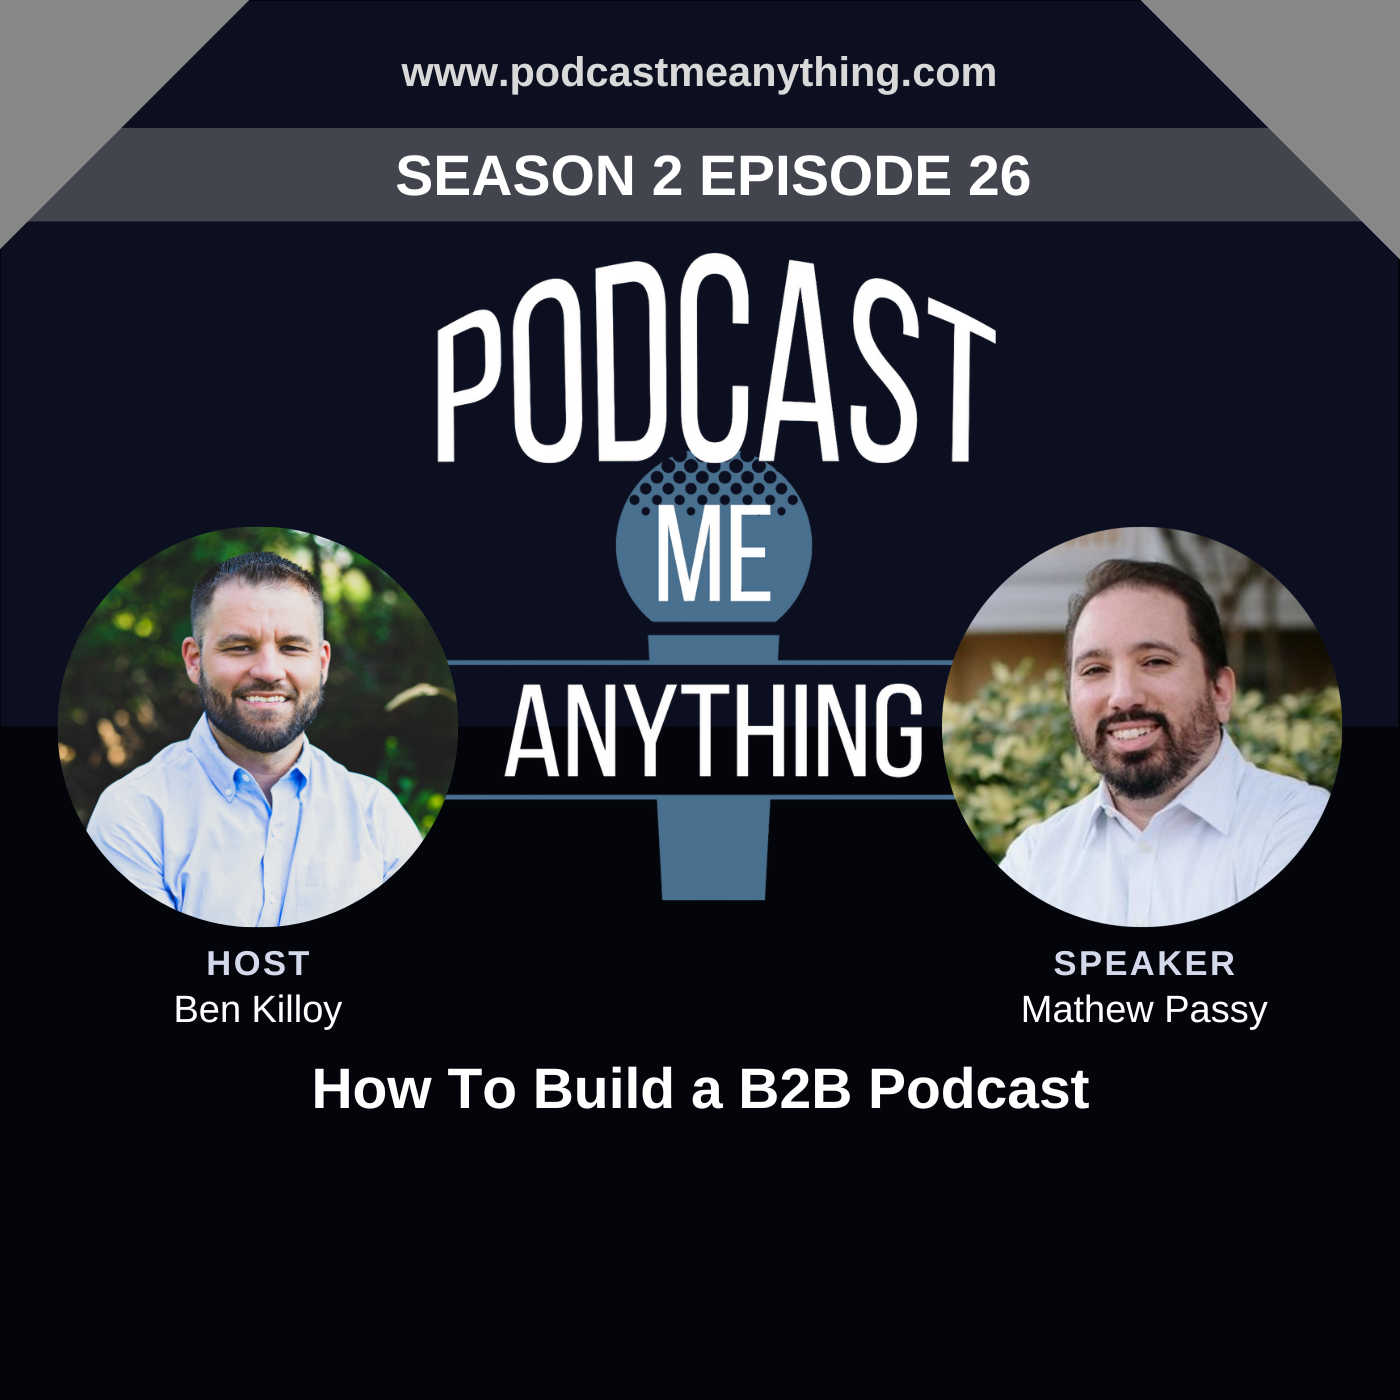 How To Build a B2B Podcast